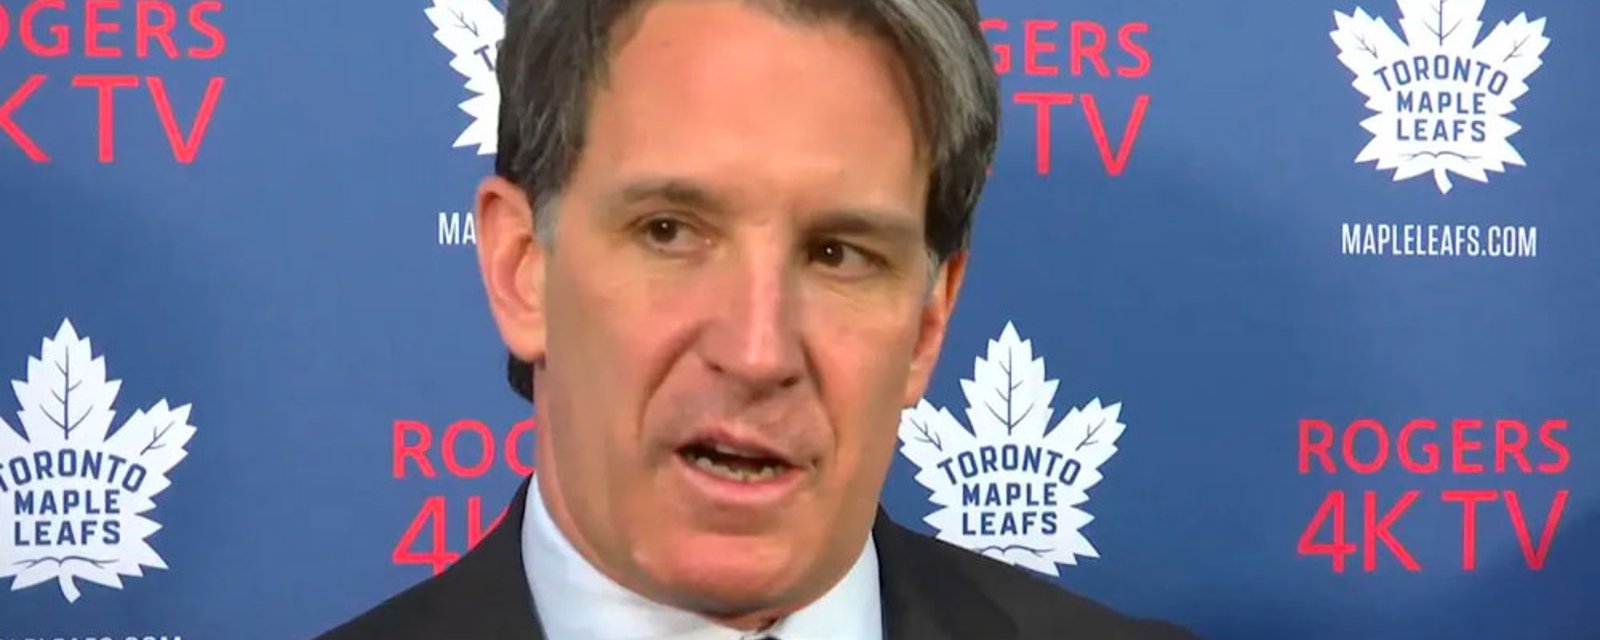 Rumor: Shanahan out, another former NHL star to replace him as Leafs' President